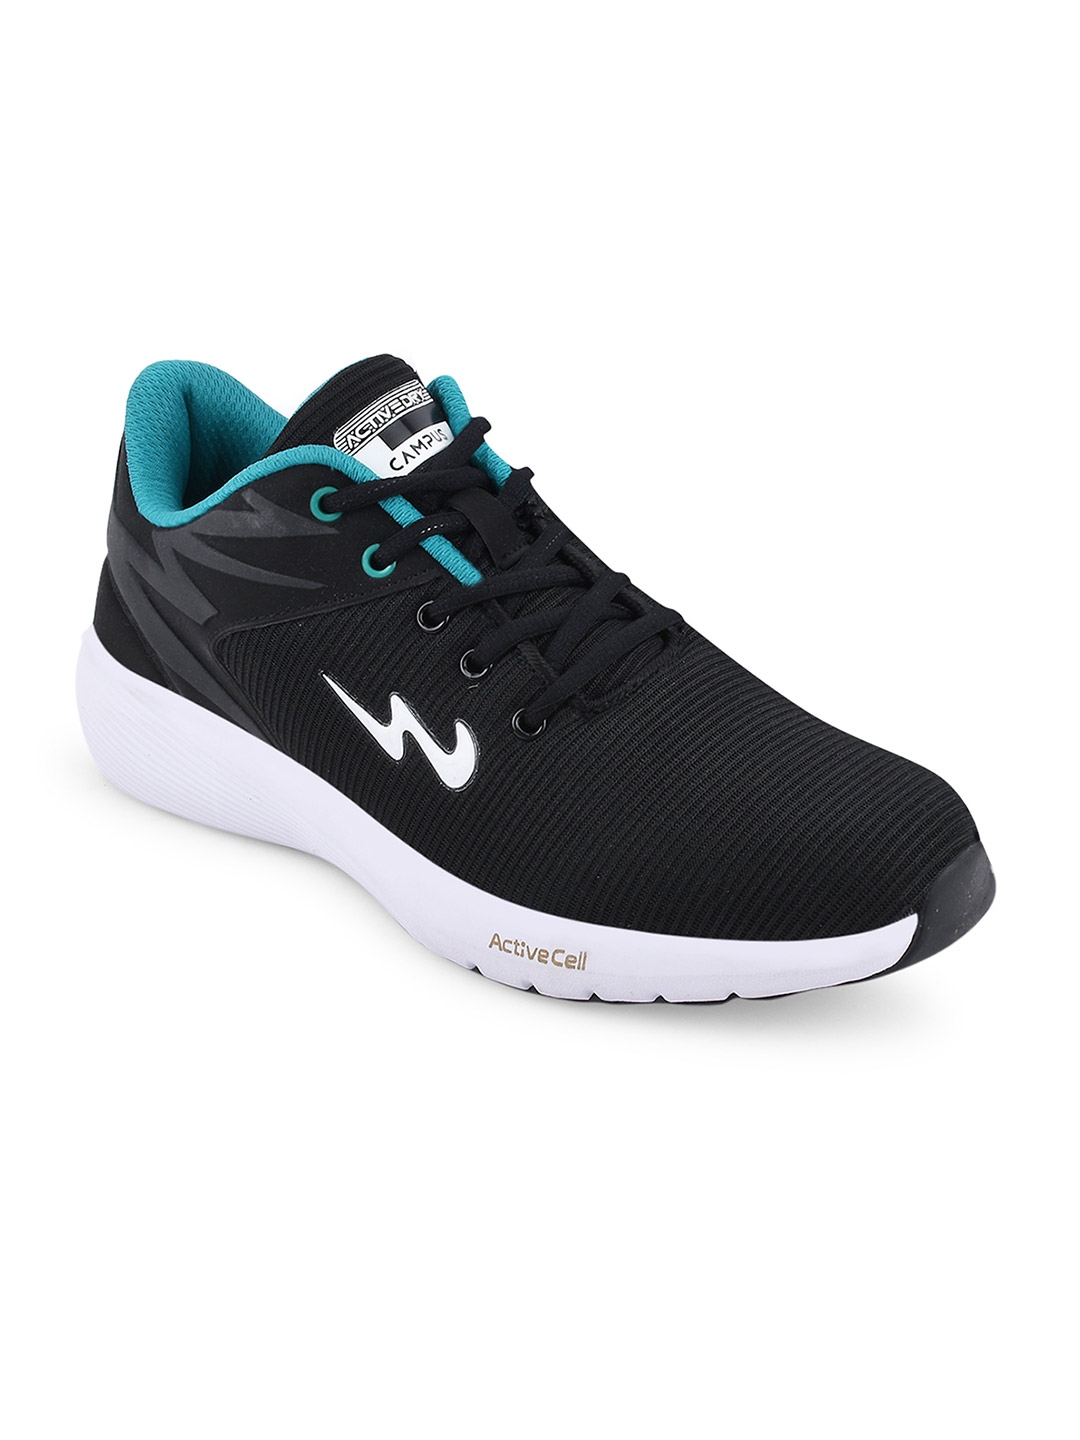 Campus Men Solid Lace-Up Sports Shoes